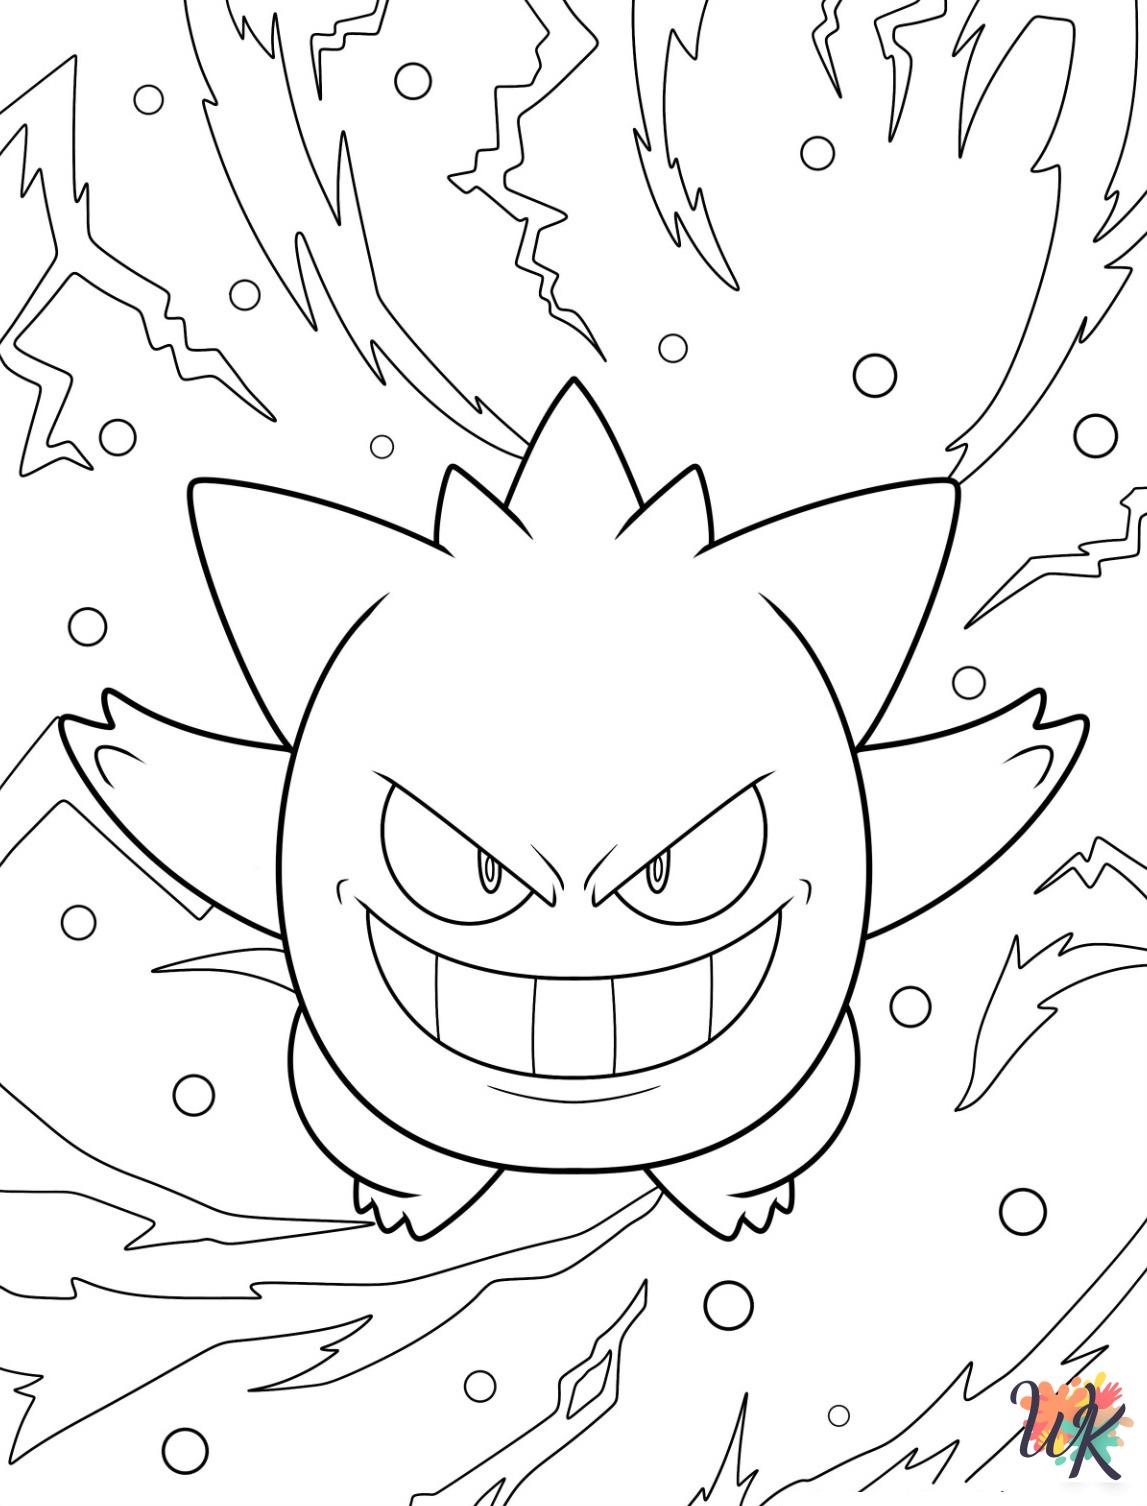 Gengar coloring pages for adults pdf